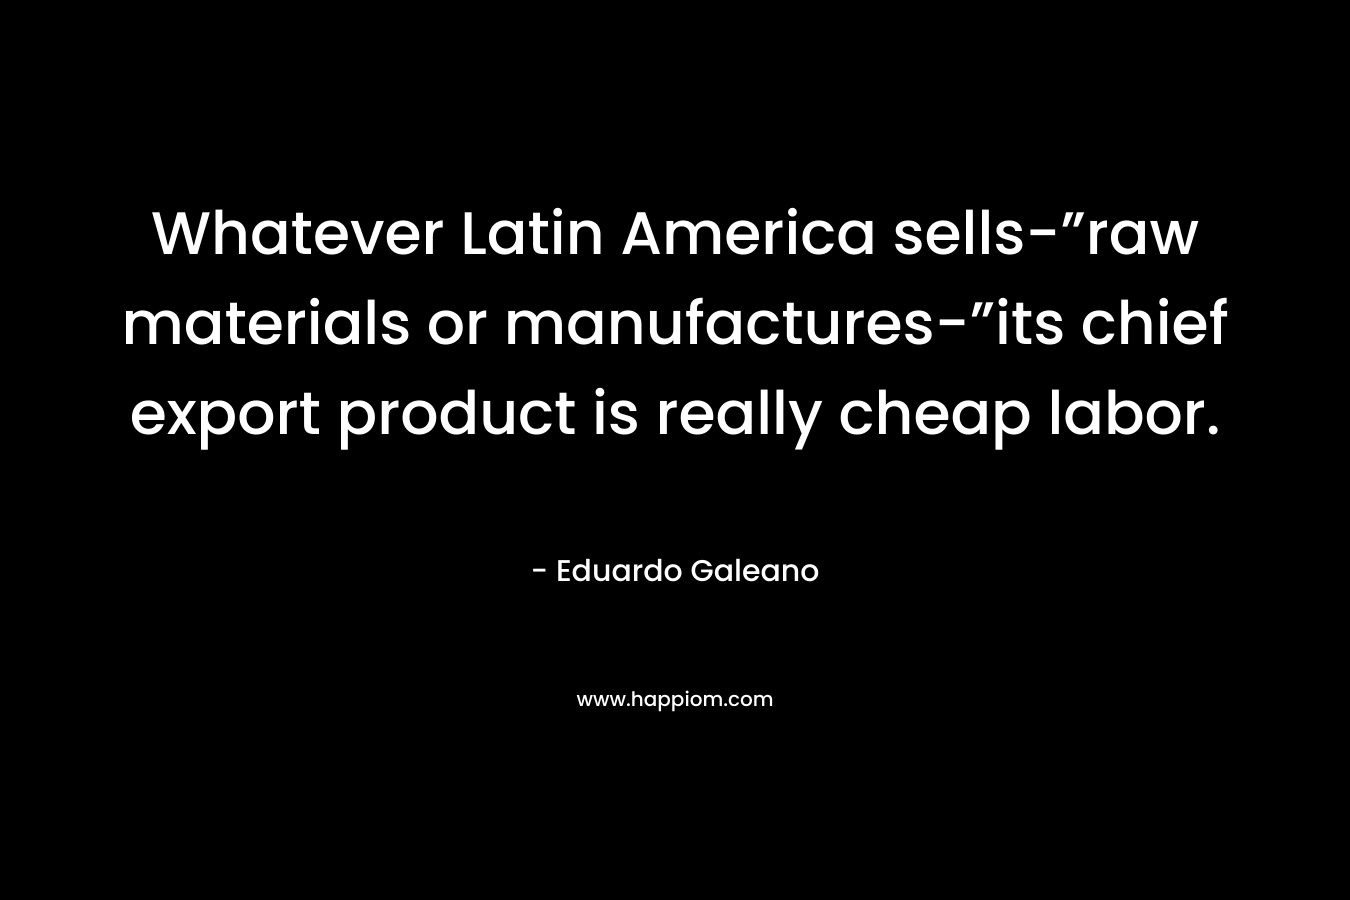 Whatever Latin America sells-”raw materials or manufactures-”its chief export product is really cheap labor. – Eduardo Galeano